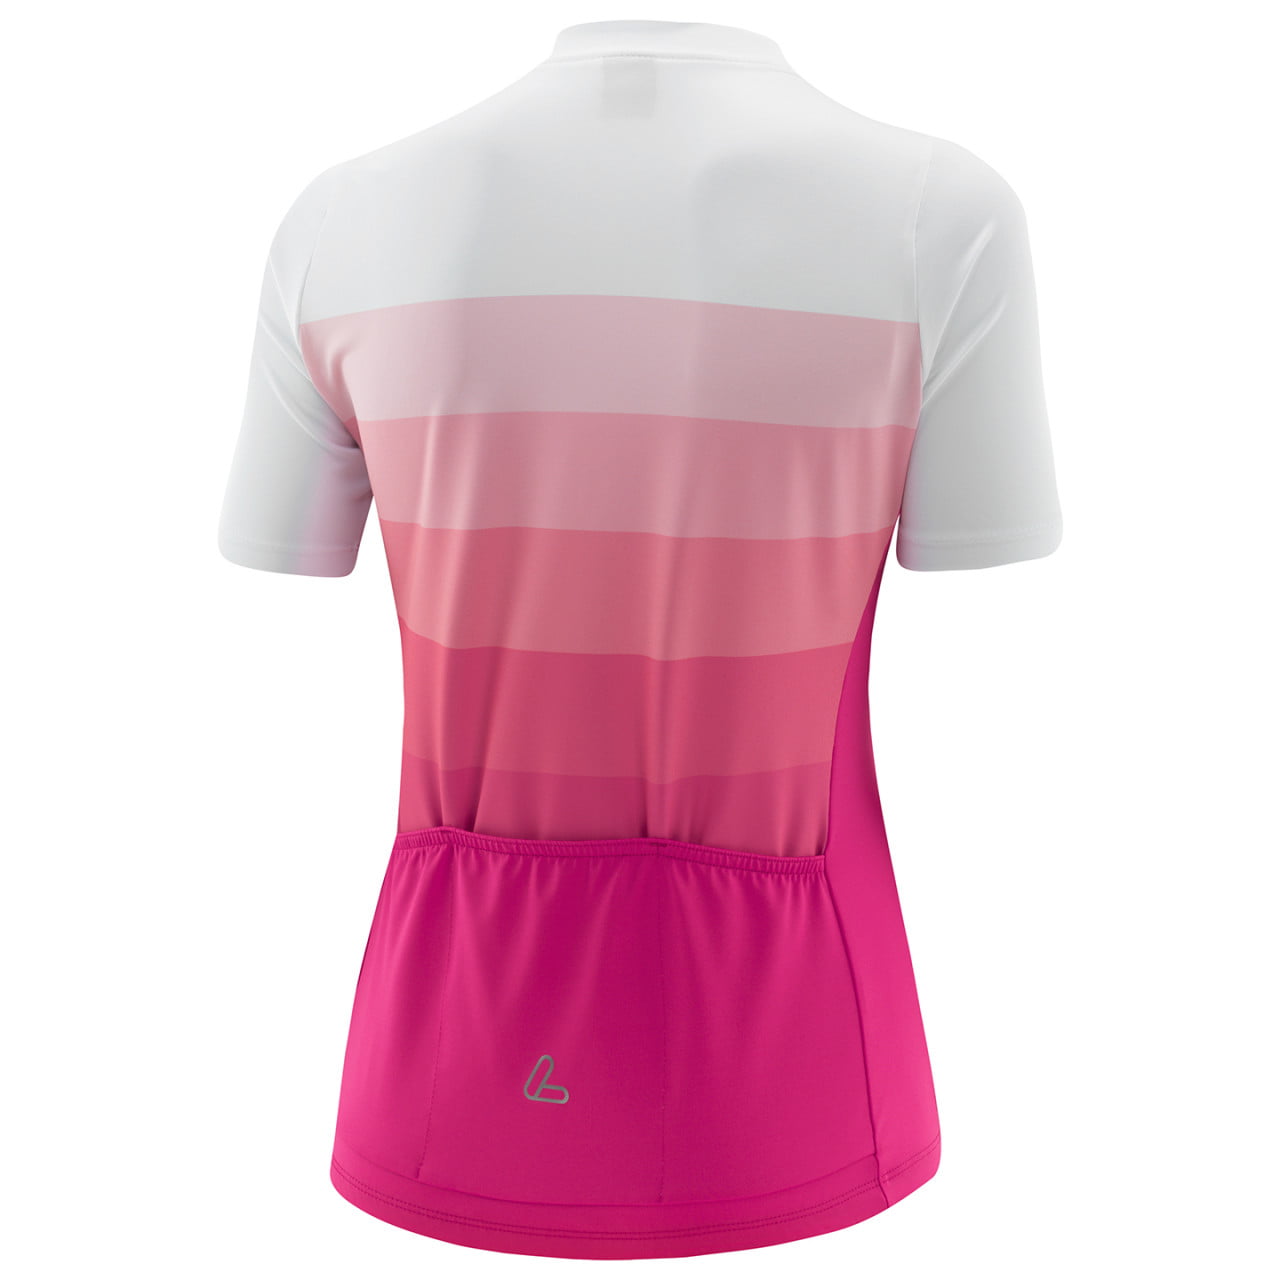 Maillot manches courtes femme Rainbow